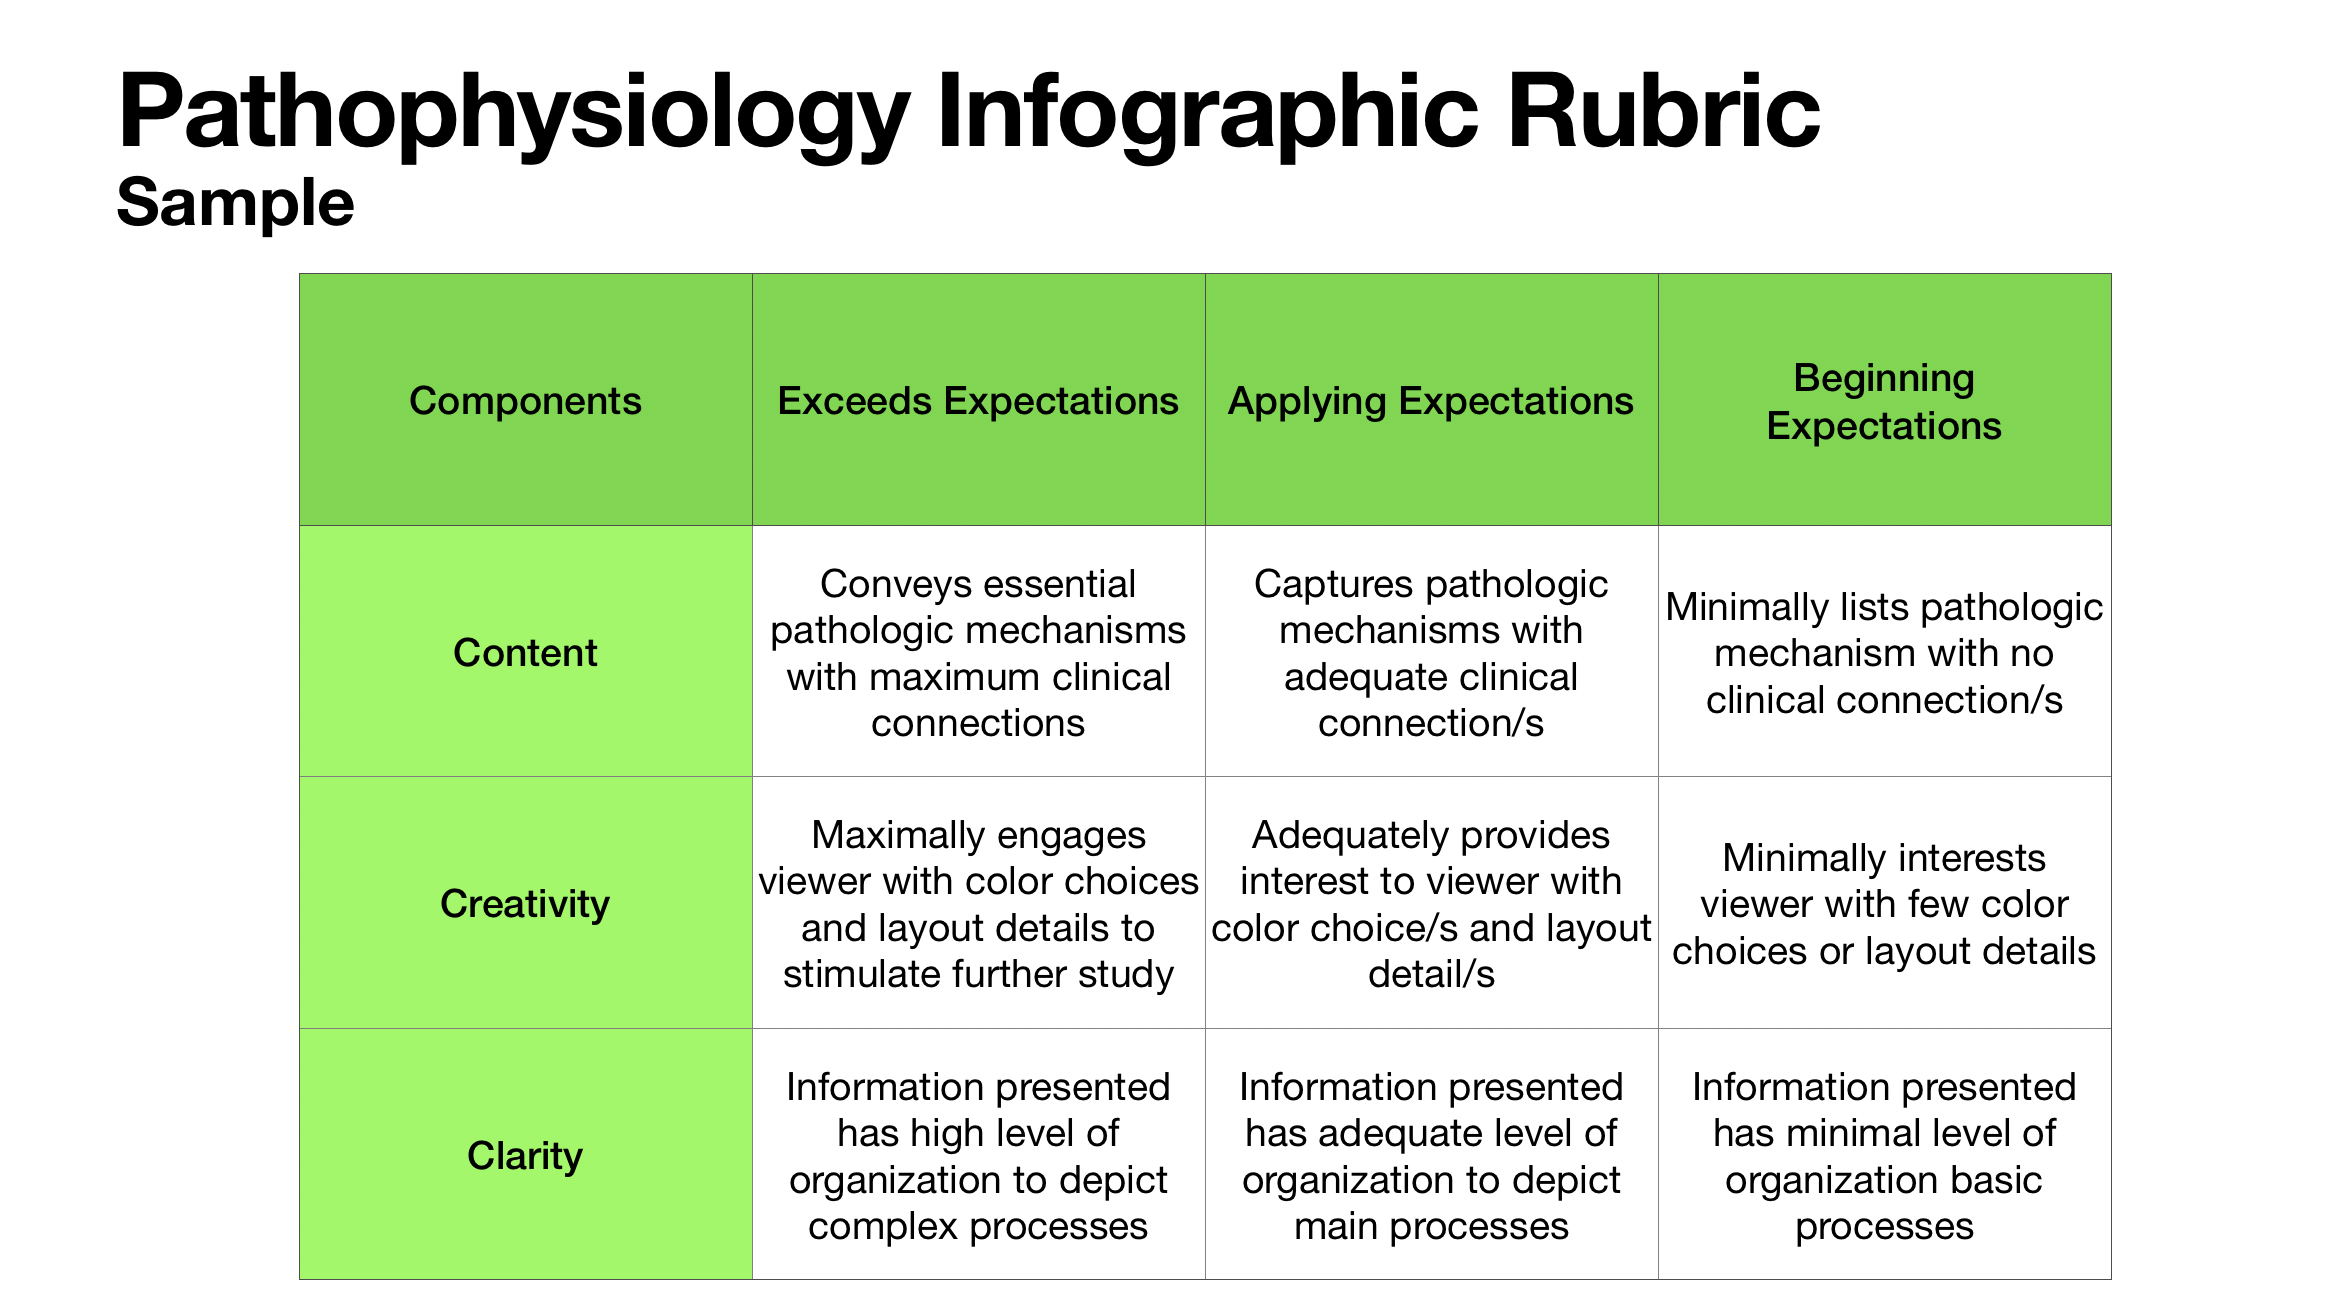 Pathophysiology infographic rubric assessed by three main component areas of content, creativity, and clarity.